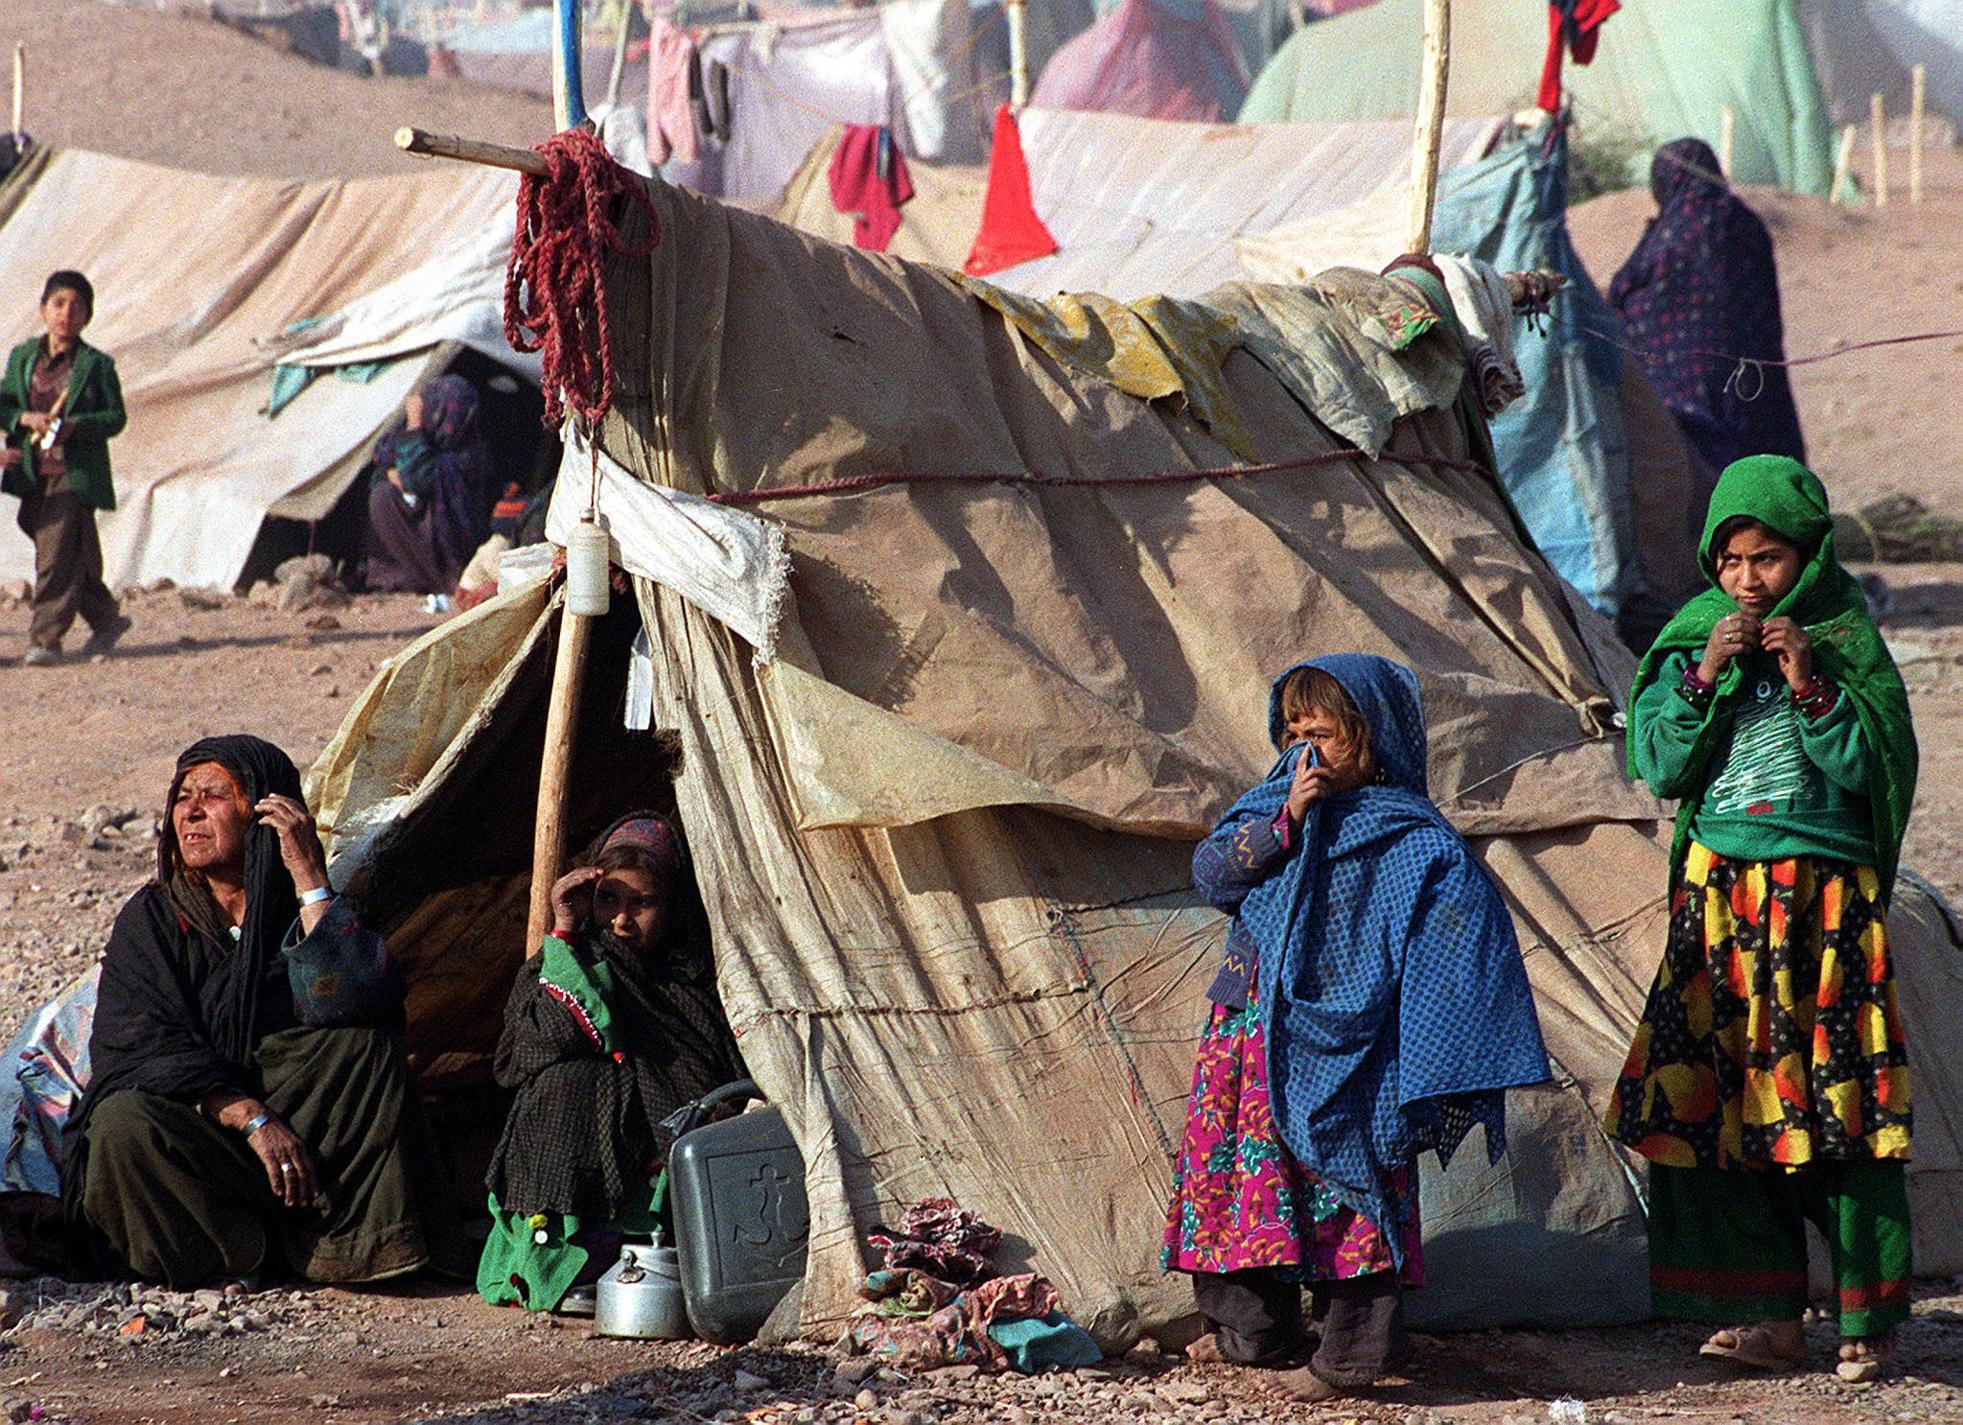 Afghan refugees stay outside their makeshift camps to feel the sun’s heat in Jalozai refugee camp near Peshawar